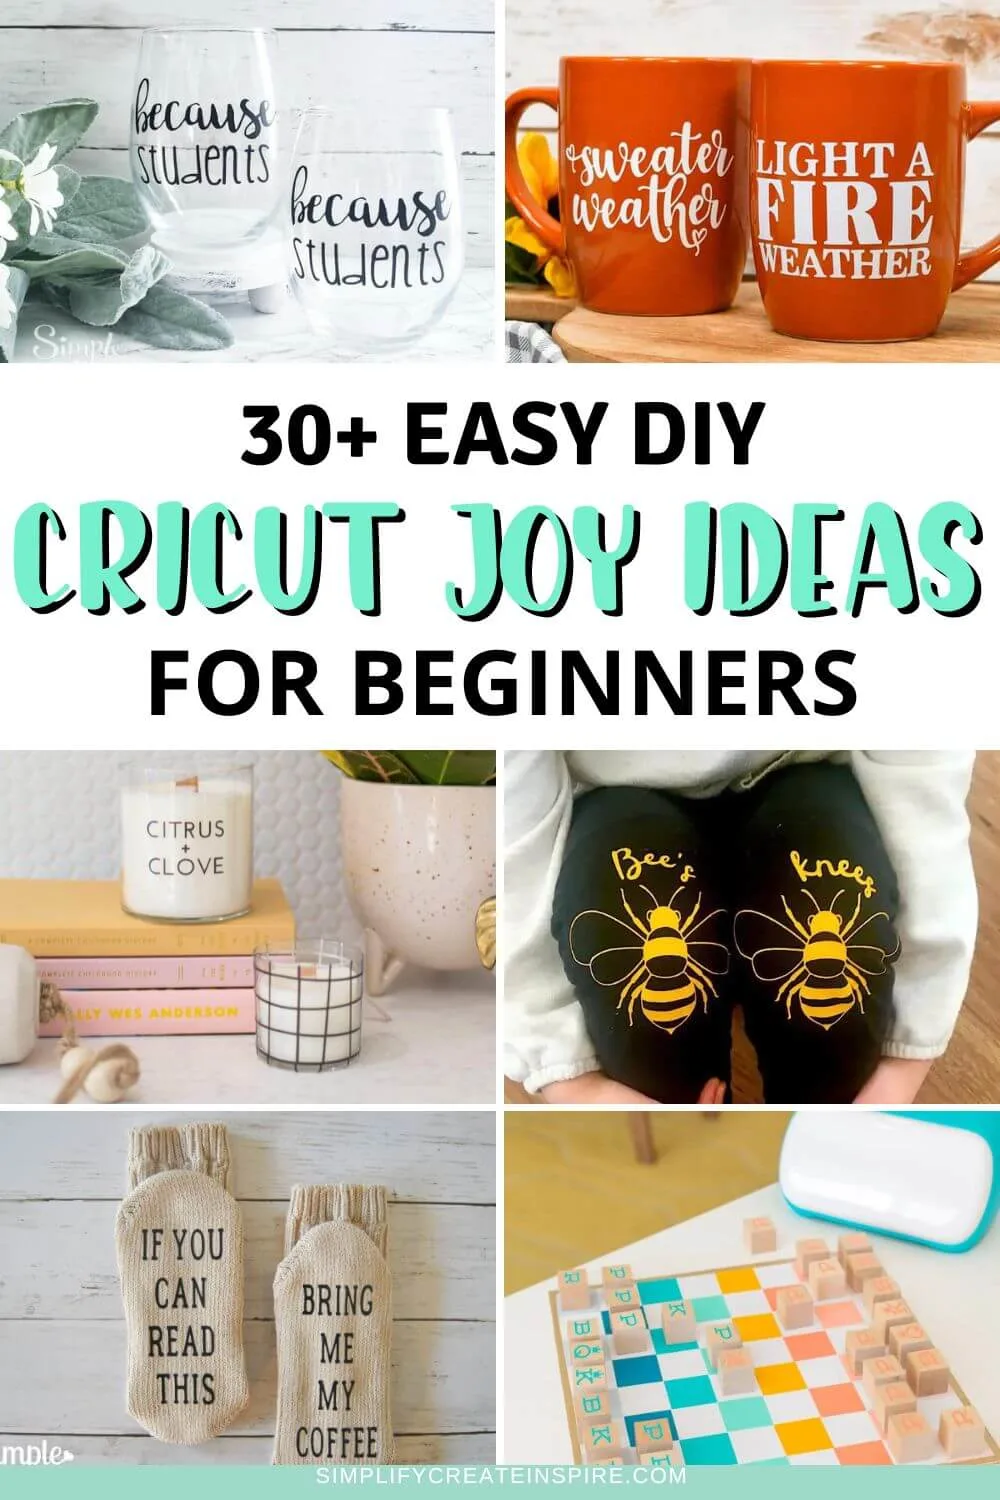 30+ easy diy cricut joy projects for beginners pinterest collage image.